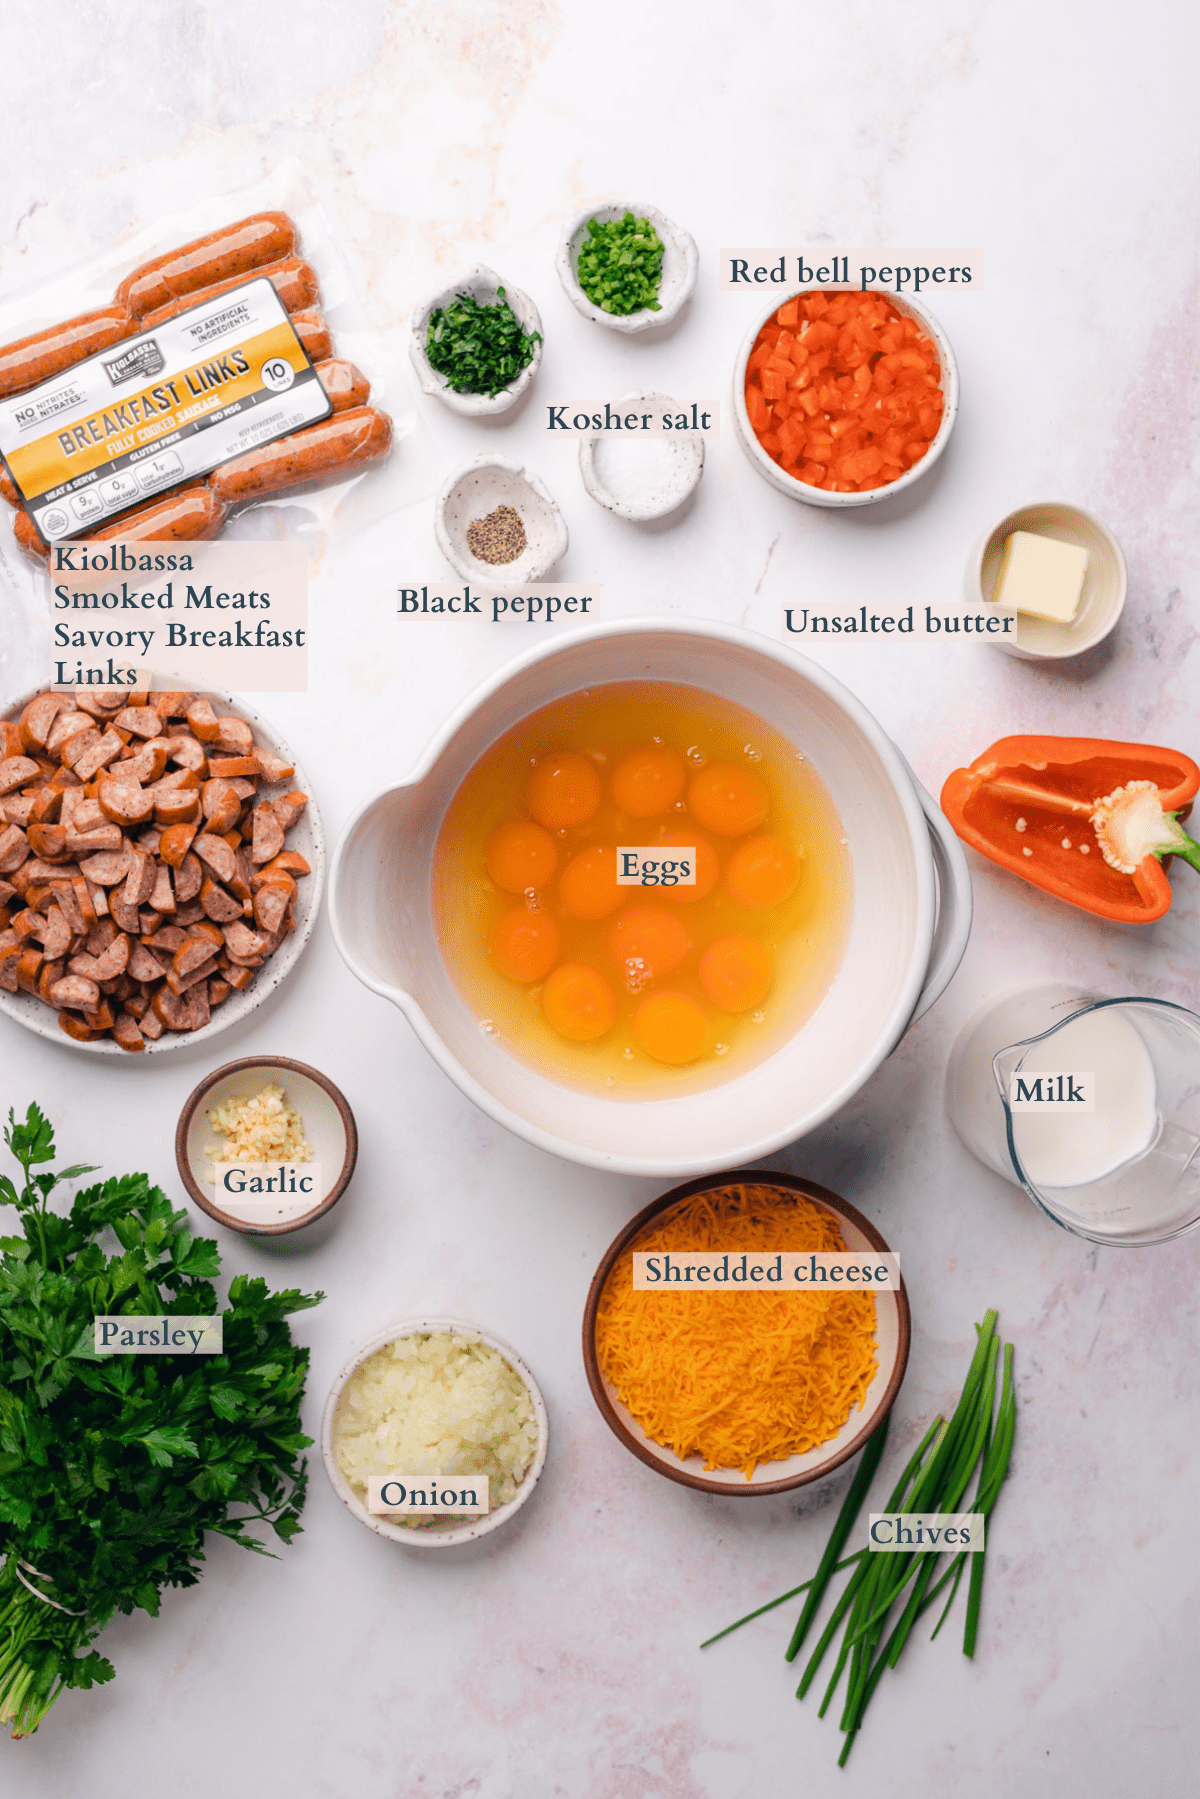 Sausage and egg muffin recipe ingredients graphic with text to denote different ingredients